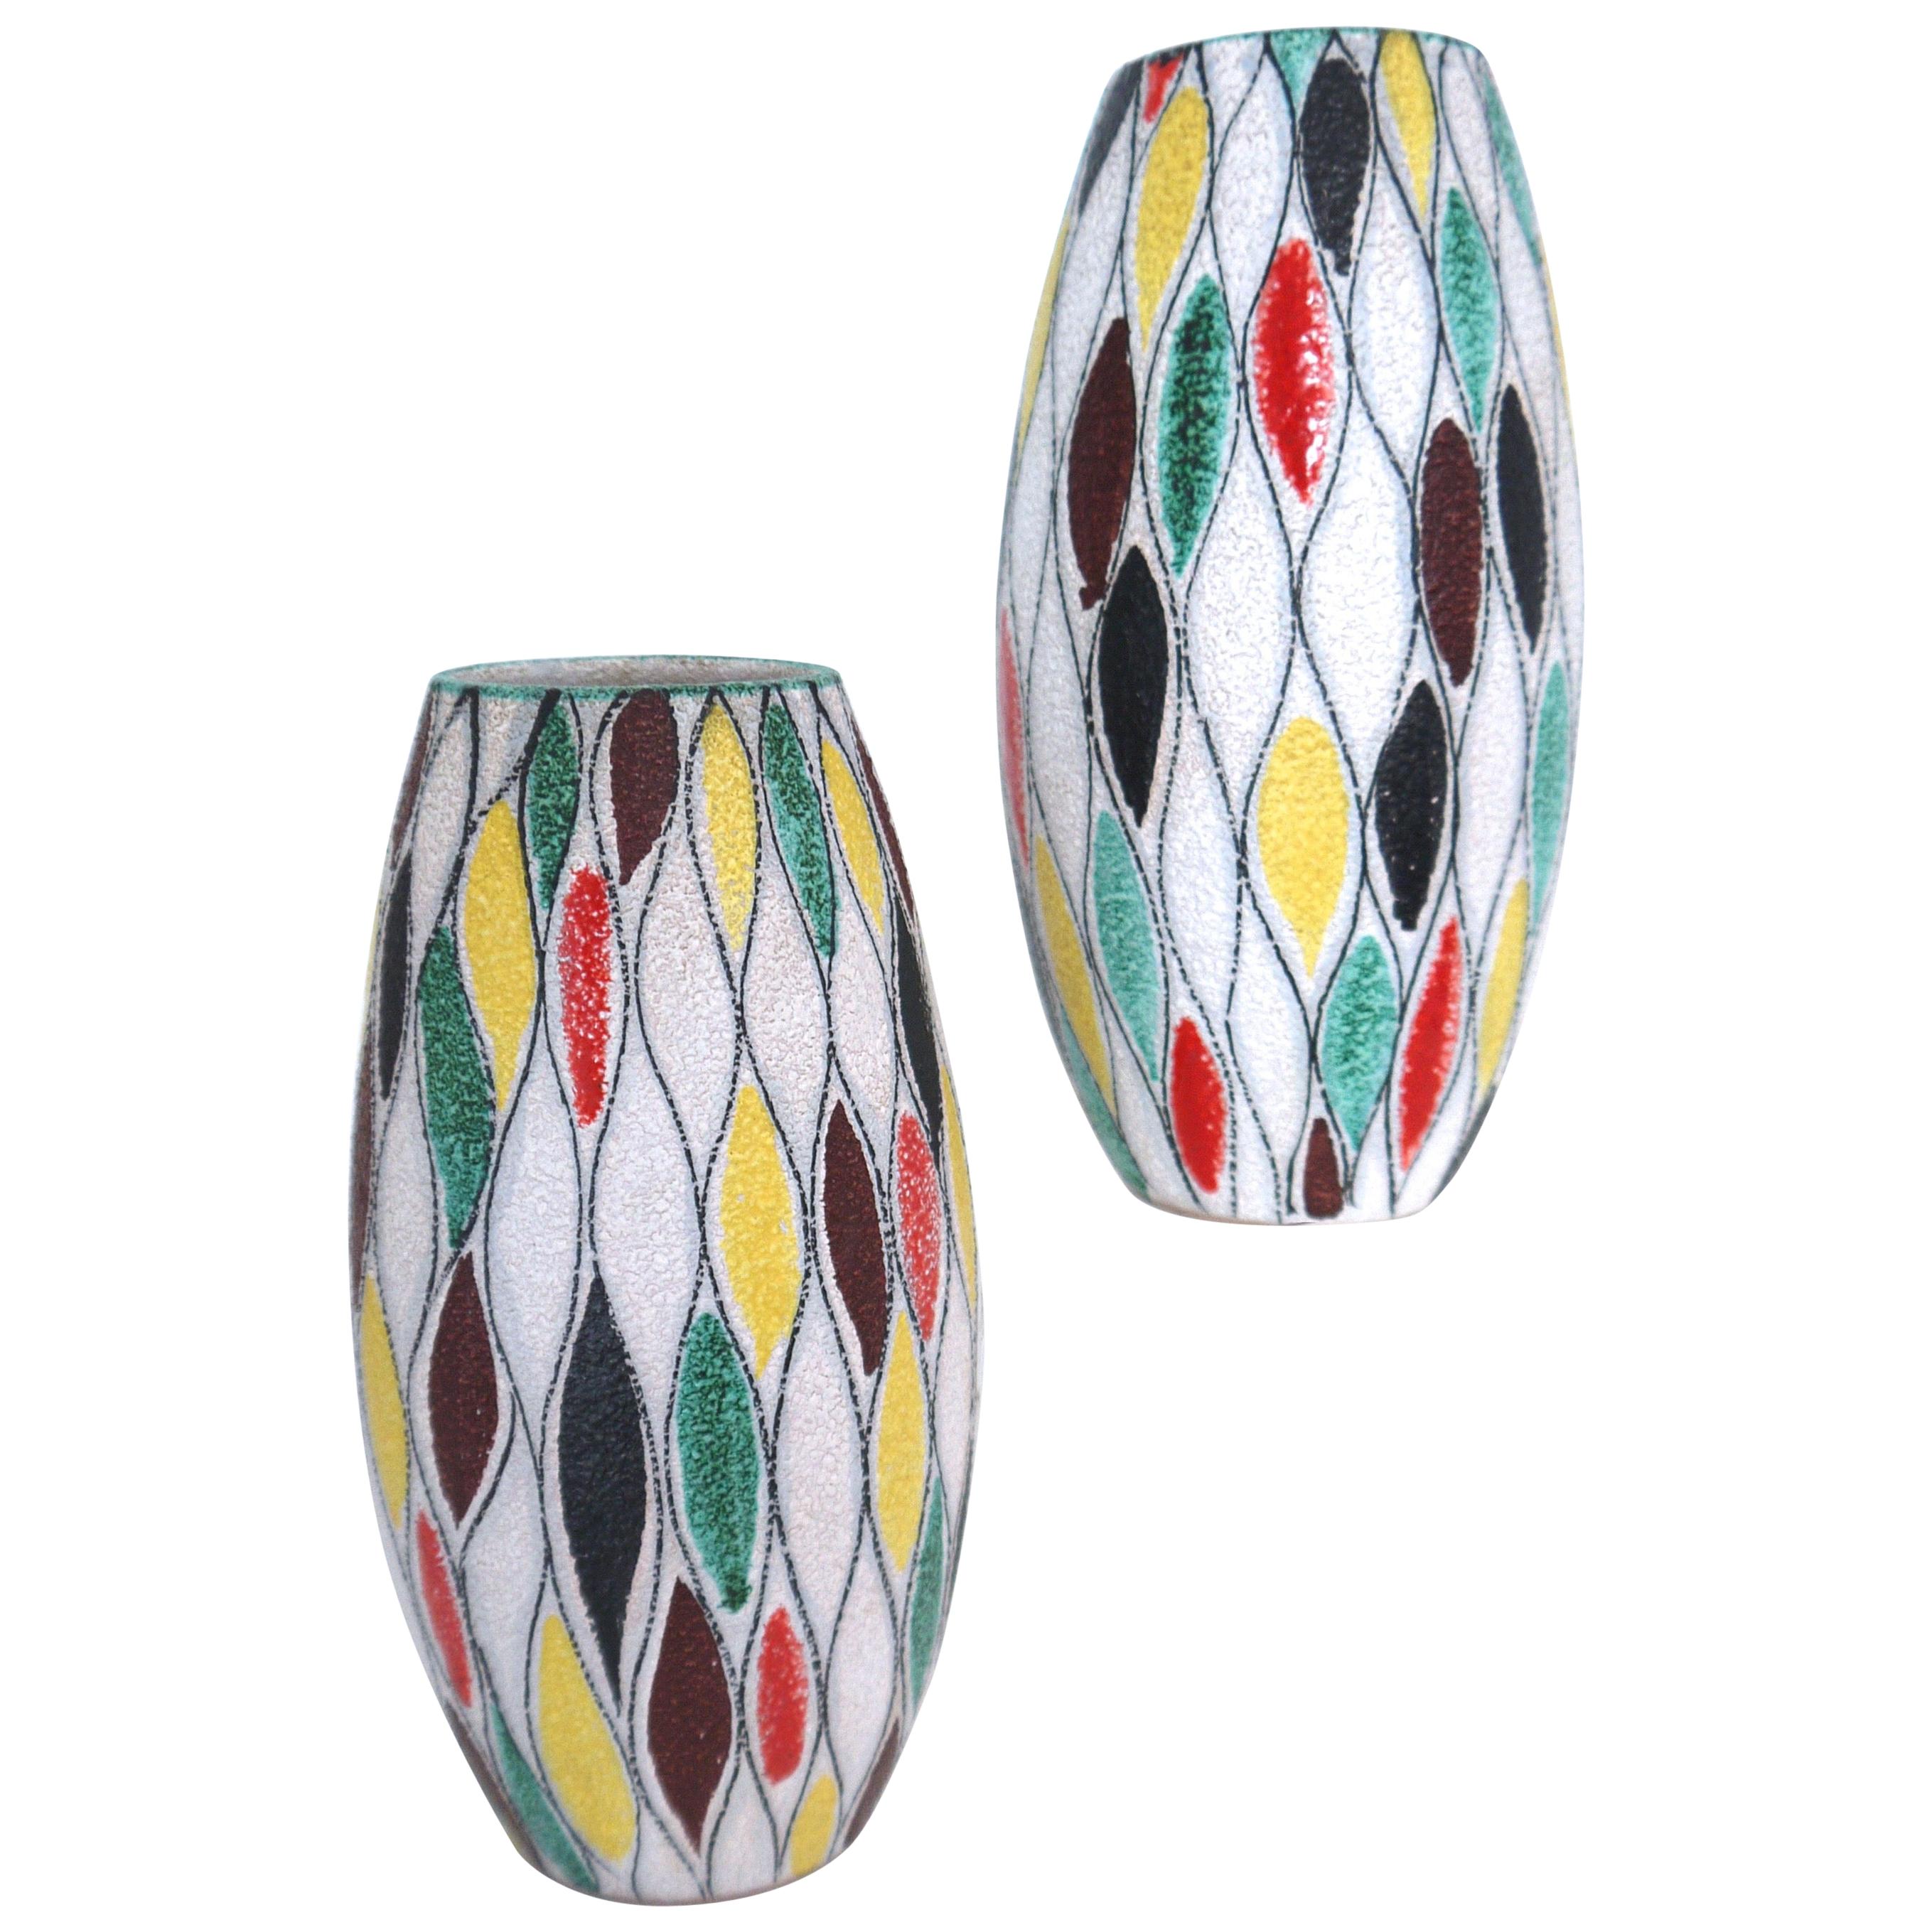 Fratelli Fanciullacci Modernist Matching Vases 1965, Signed  For Sale